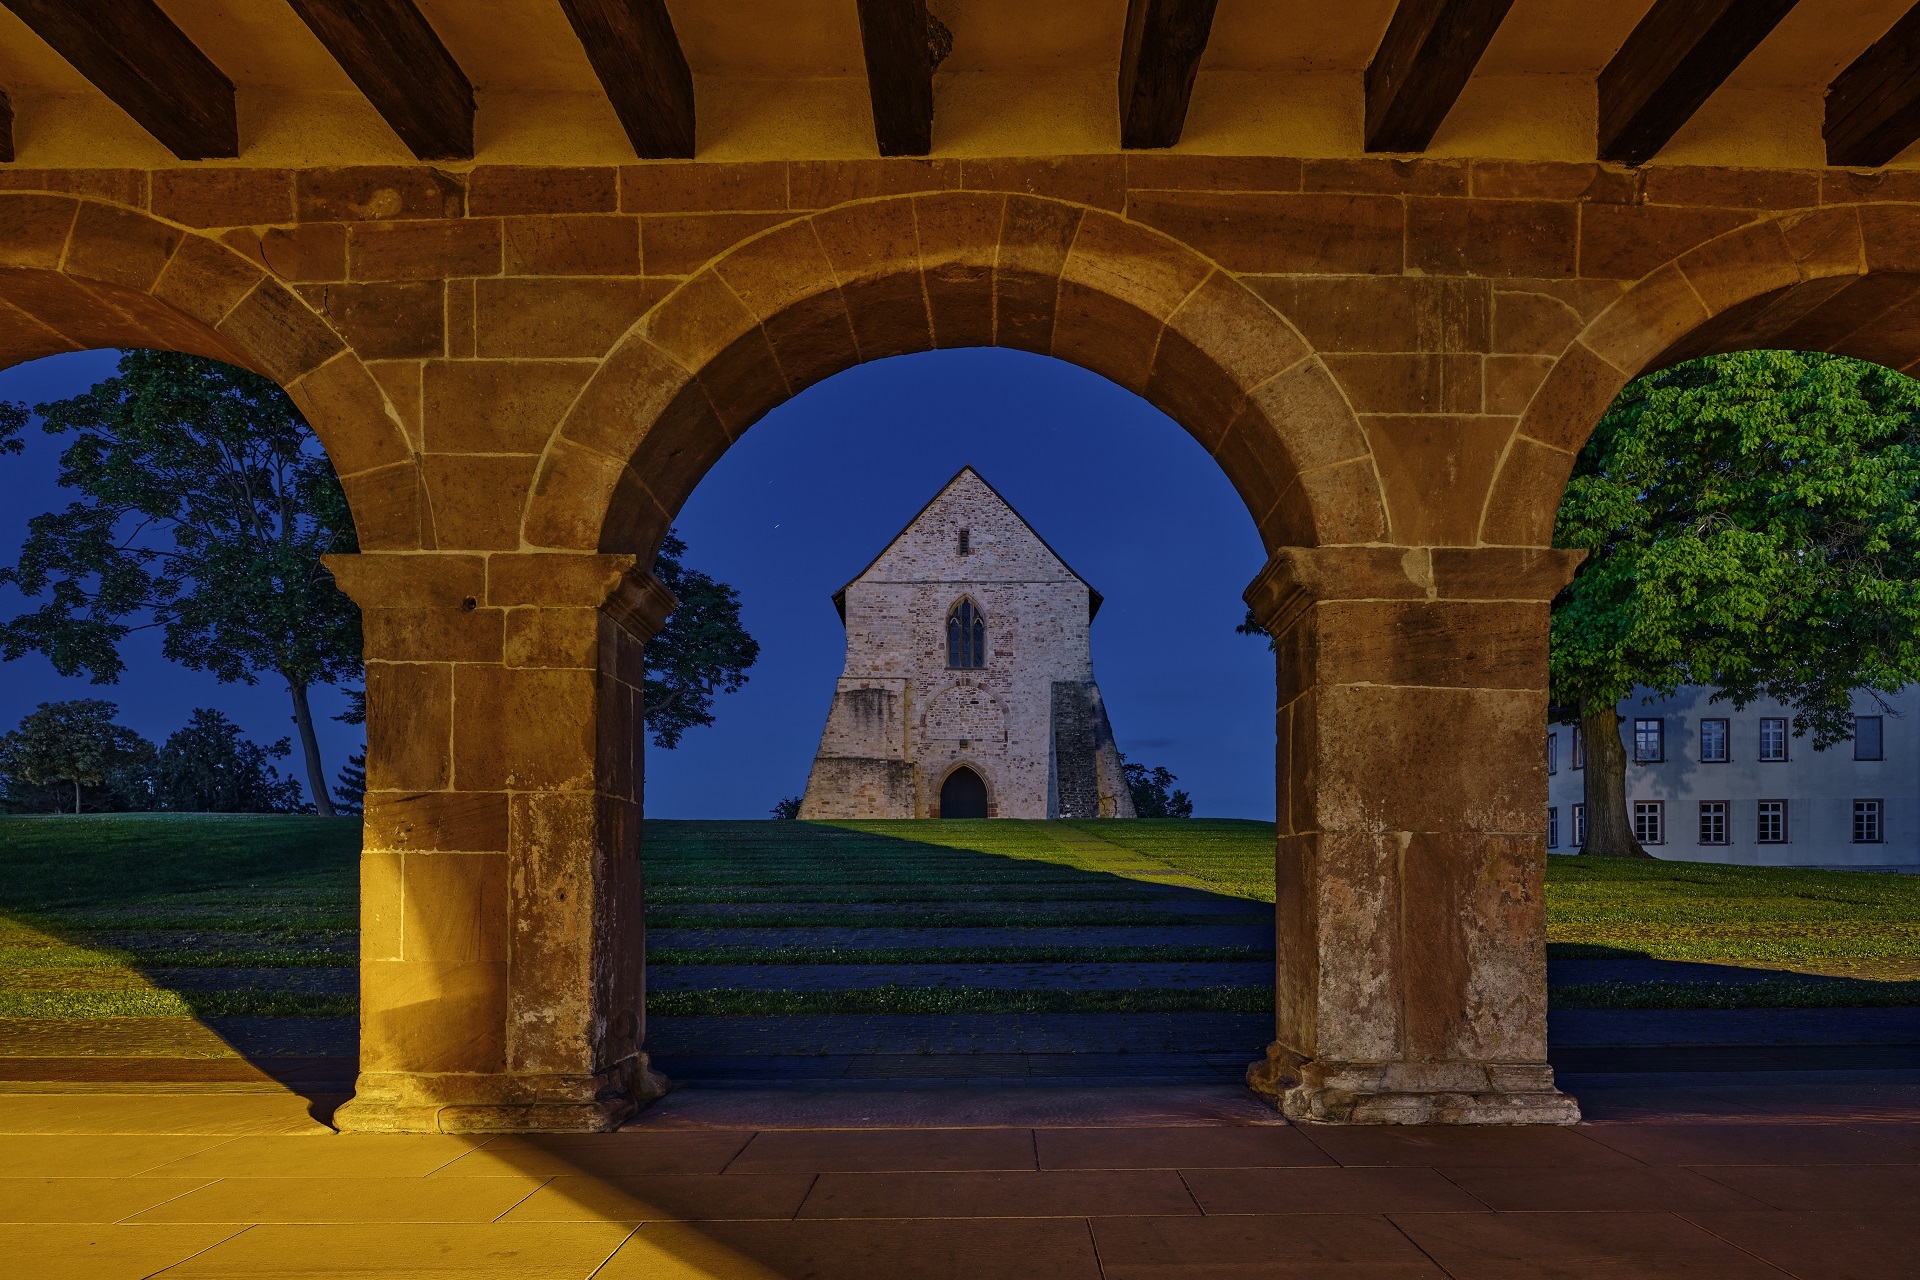 Evening view of the church fragment through the gate hall